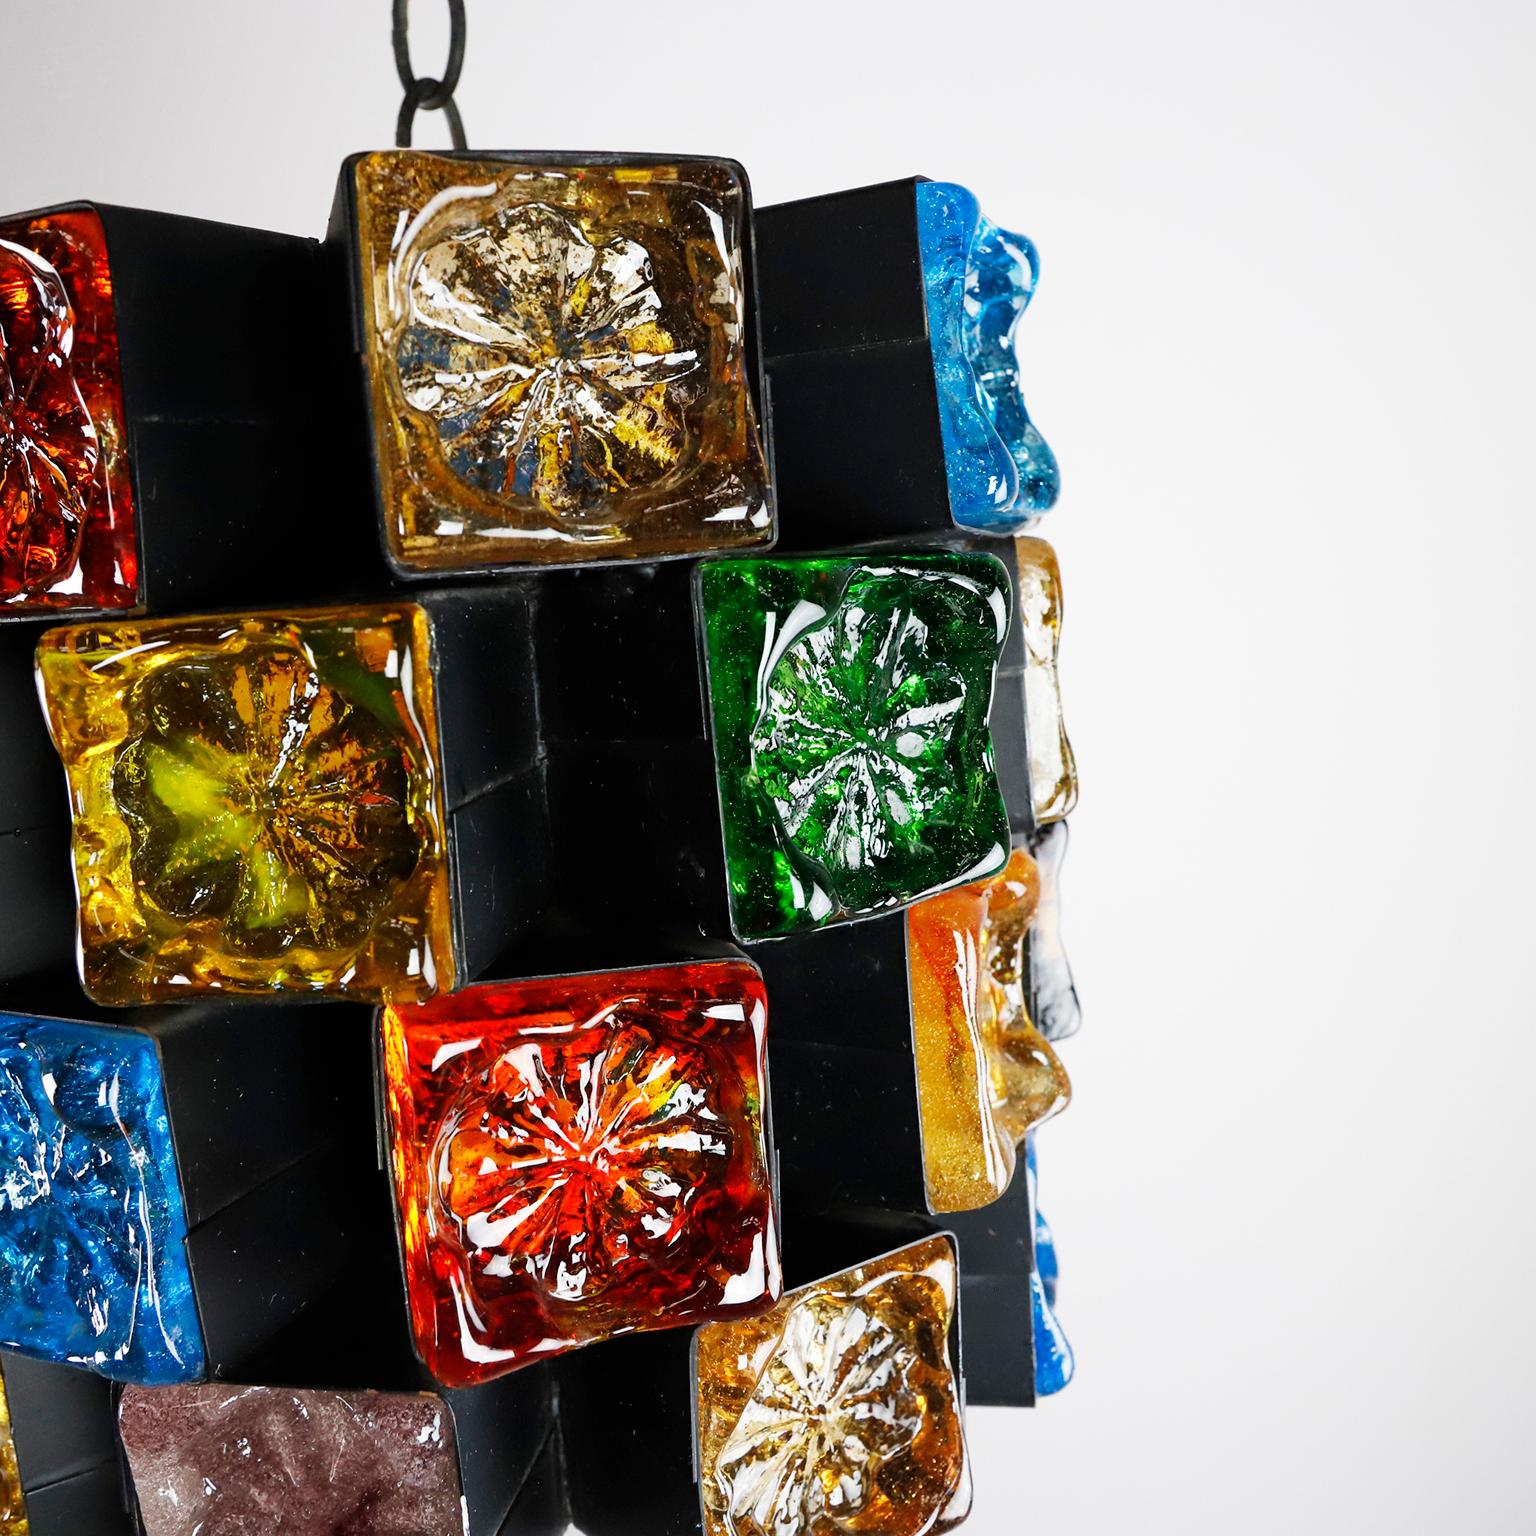 Circa 1970, we offer these original pendant light, these are one of the most stunning samples of Brutalist art designed by Felipe Delfinger. Made of iron and multicolored blown glass.